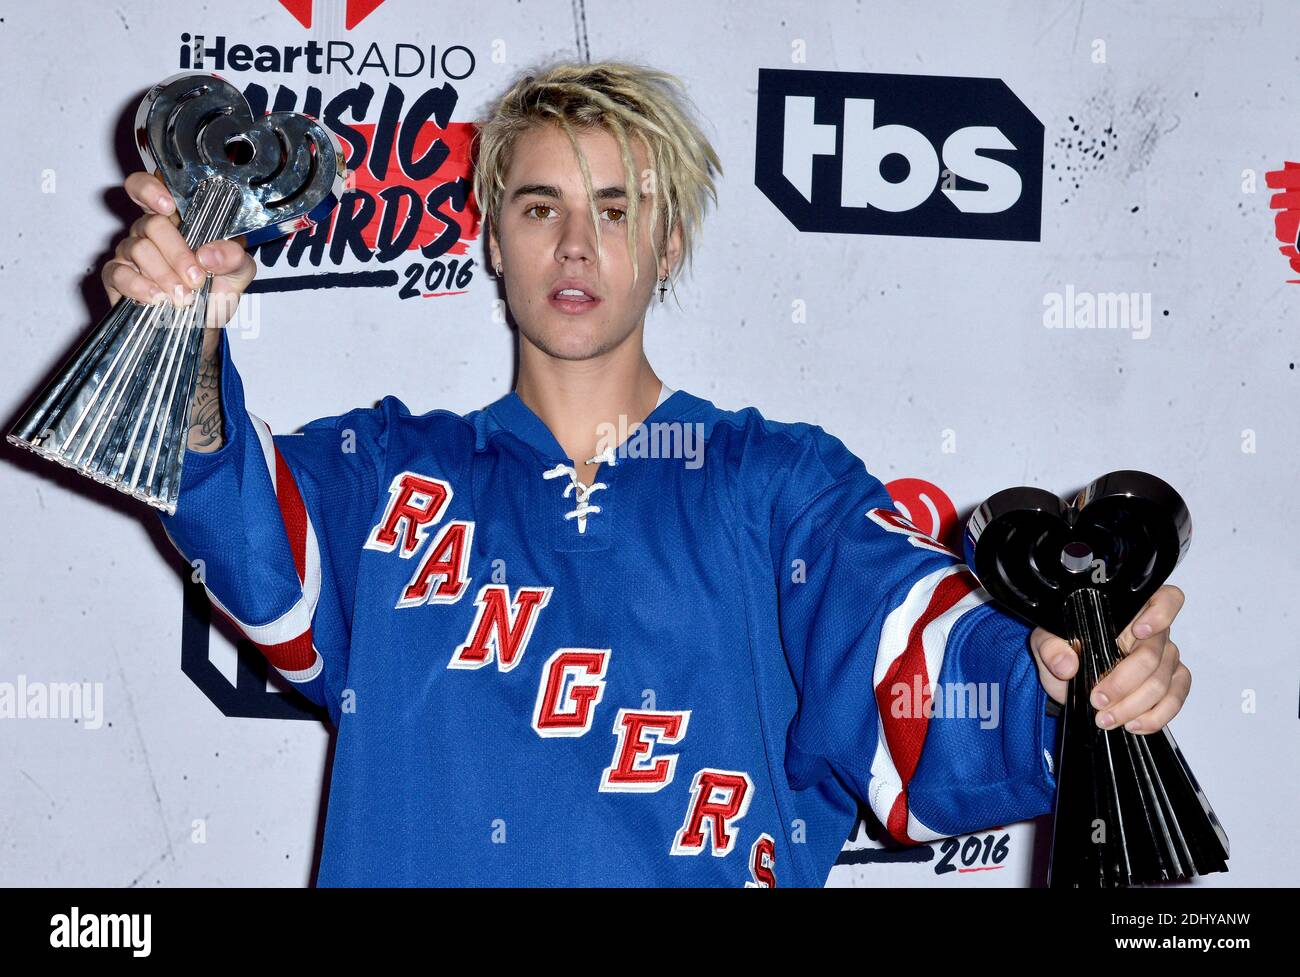 Justin Bieber's Epic Win at iHeartRadio Music Awards 2016